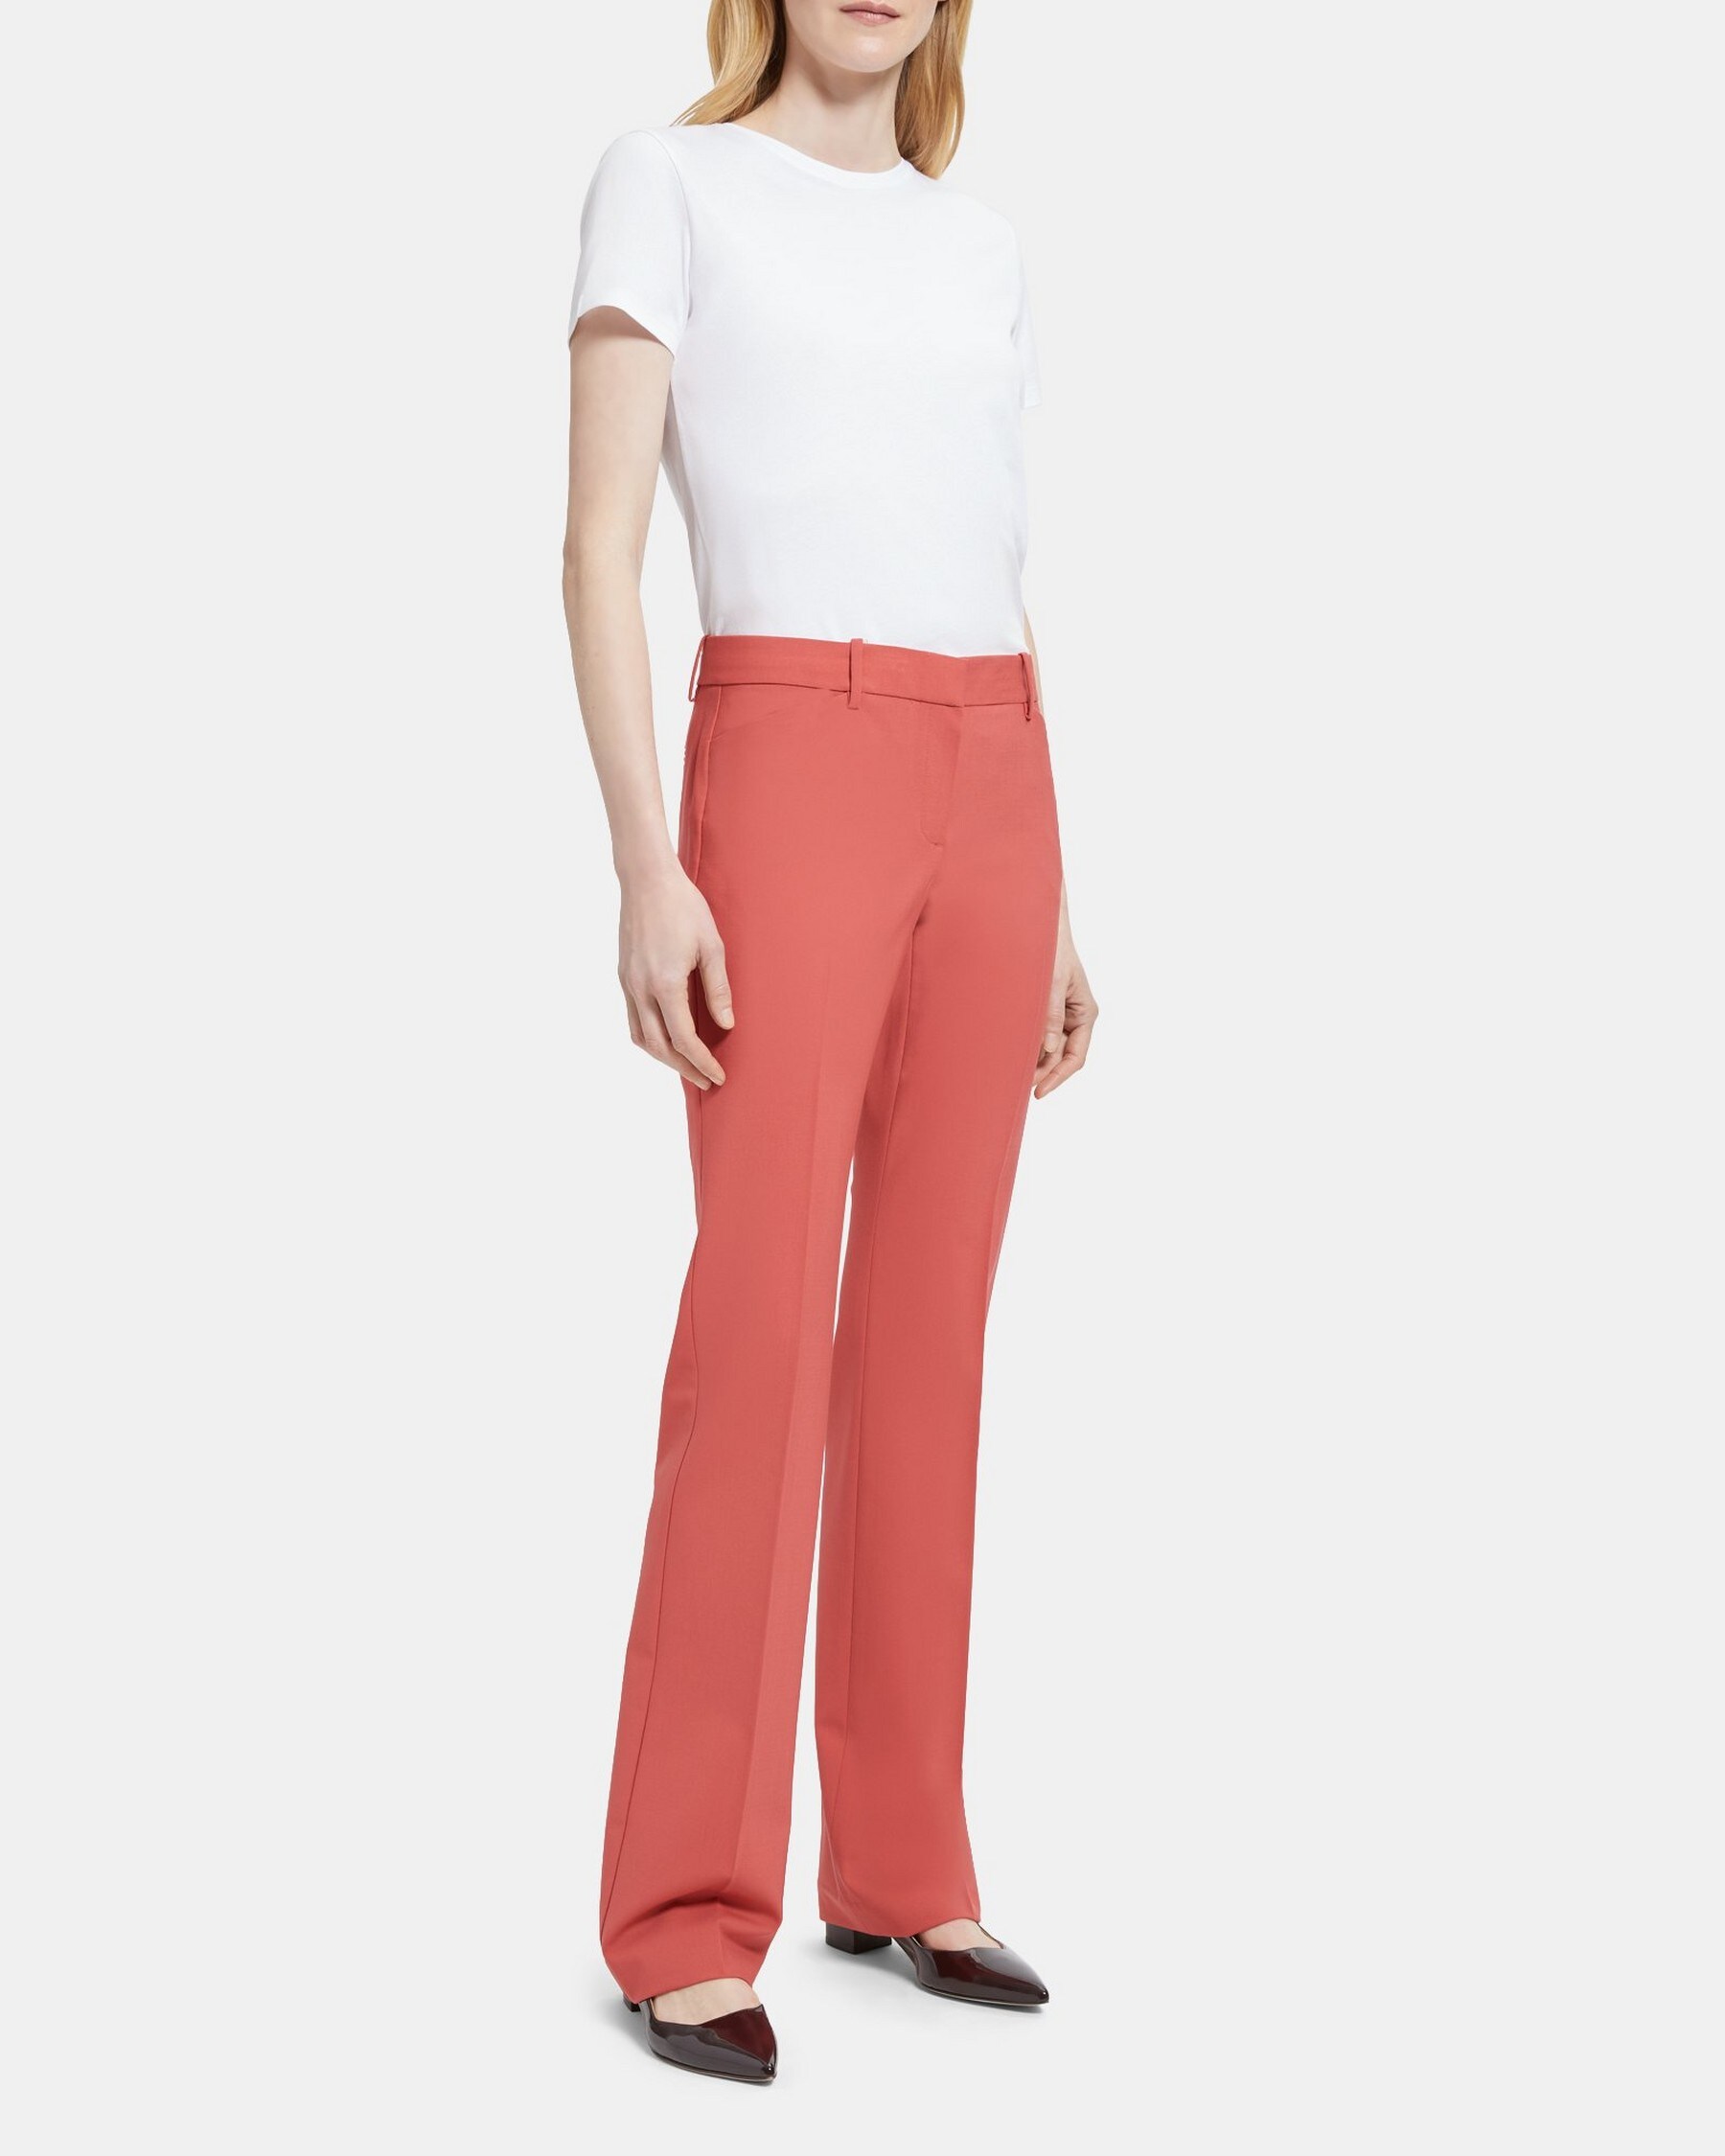 Sevona Stretch Wool Straight Pant | Theory Outlet